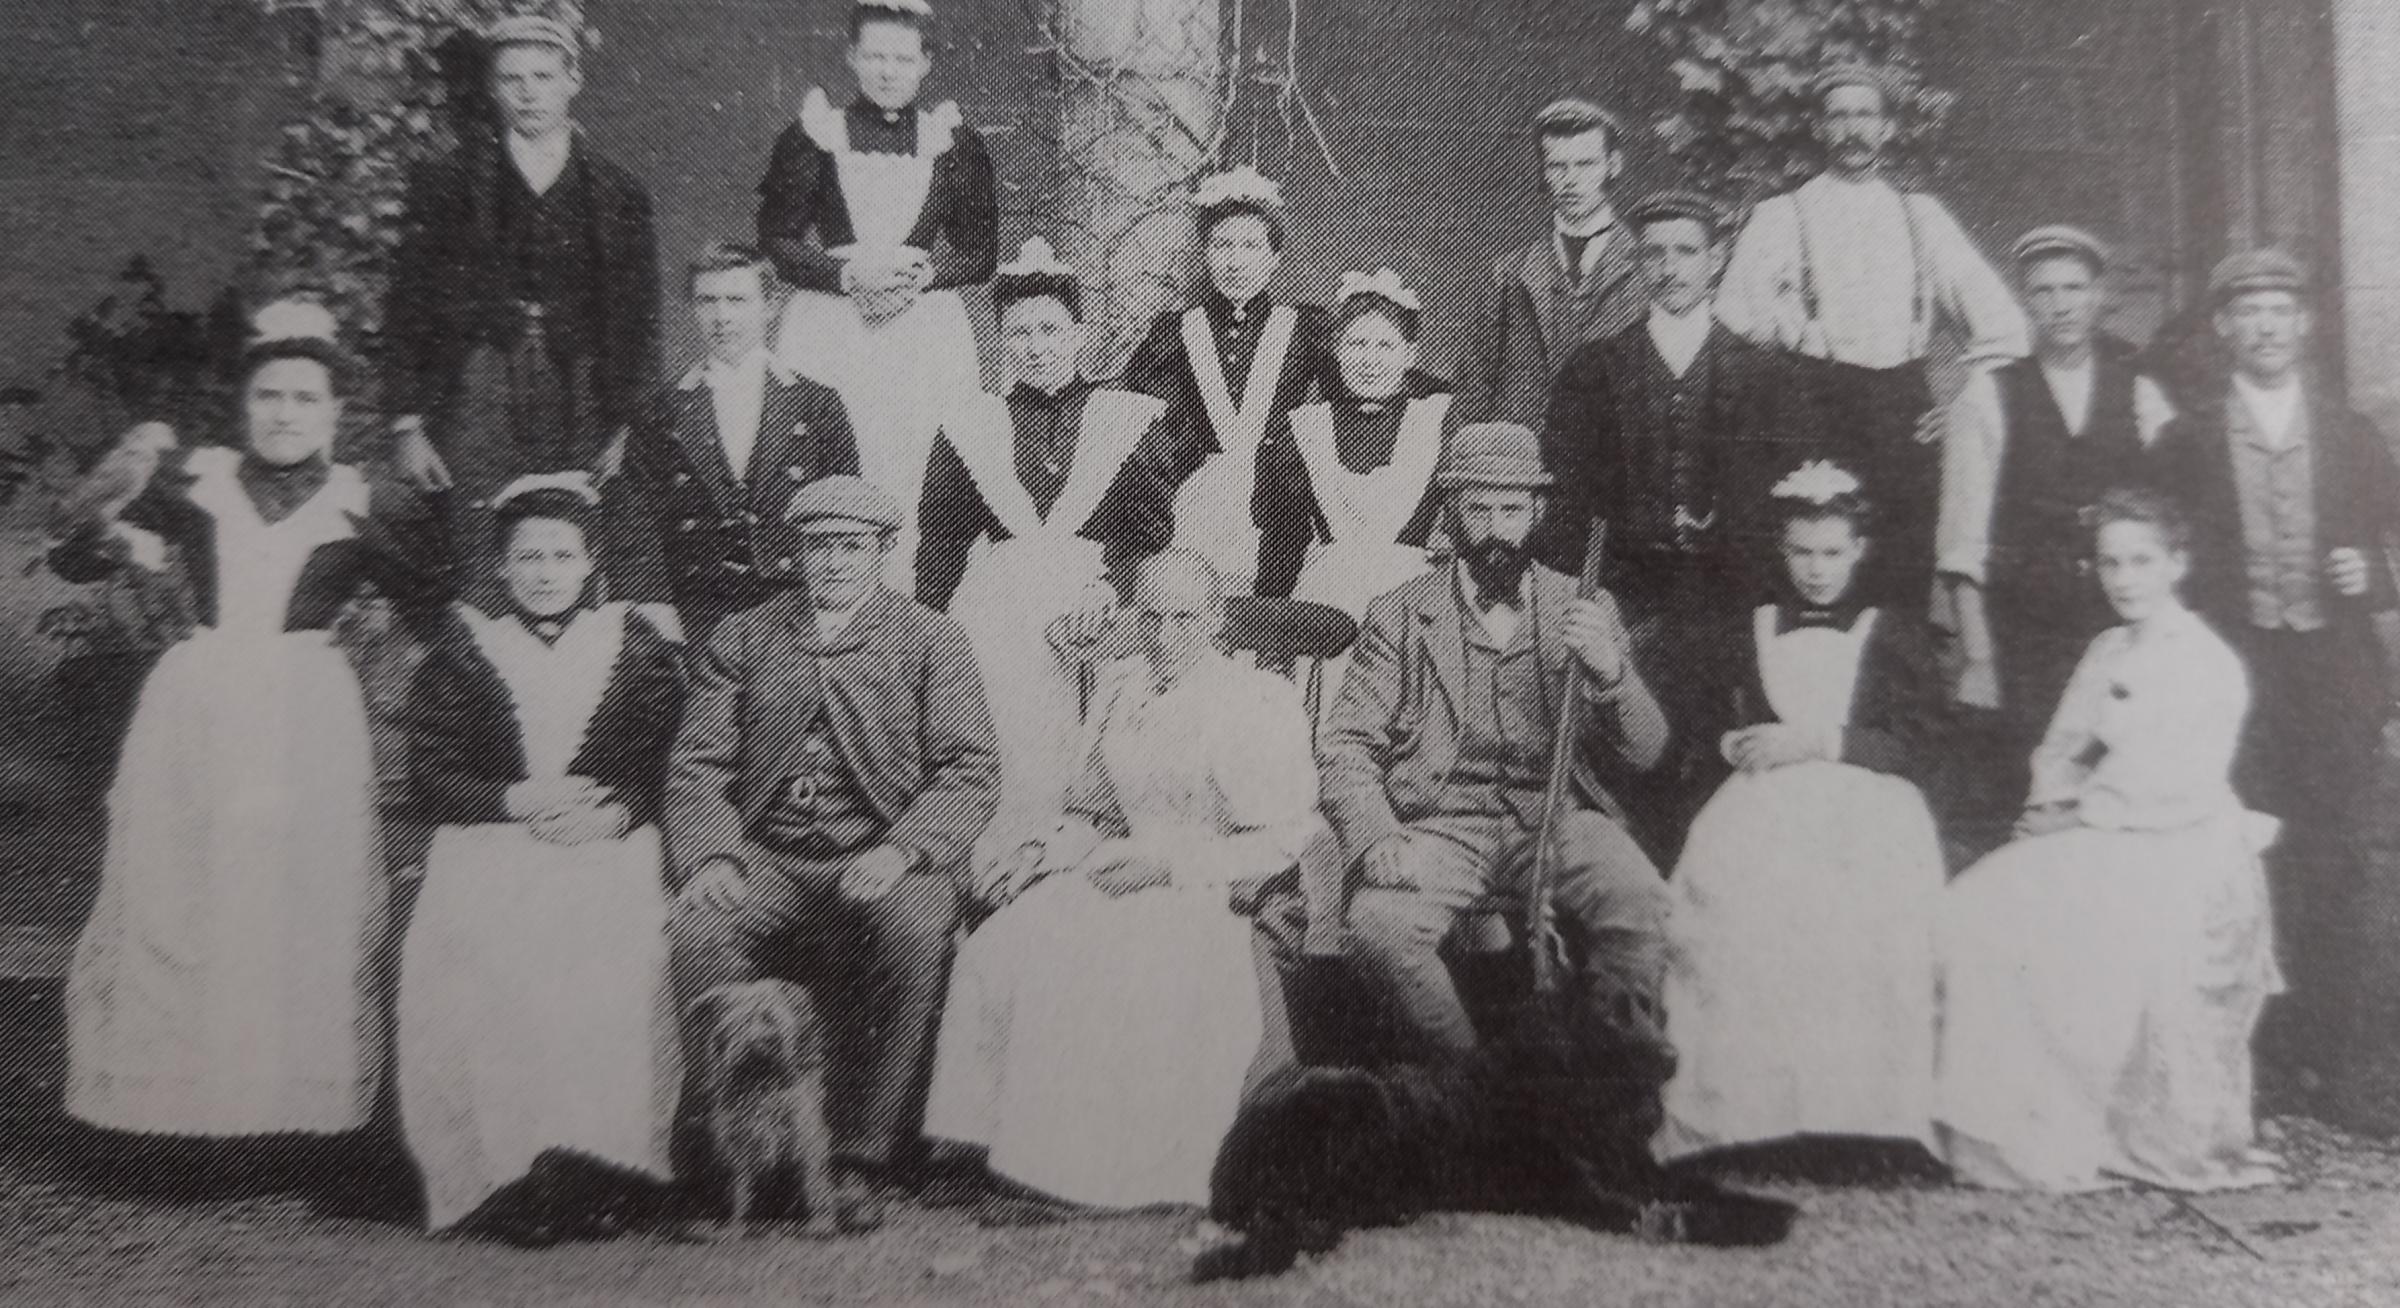  DOWNSTAIRS: Staff at a Worcestershire country house in the early 1900s, where no-one was expected to “piddle about” or work in an unhurried manner 